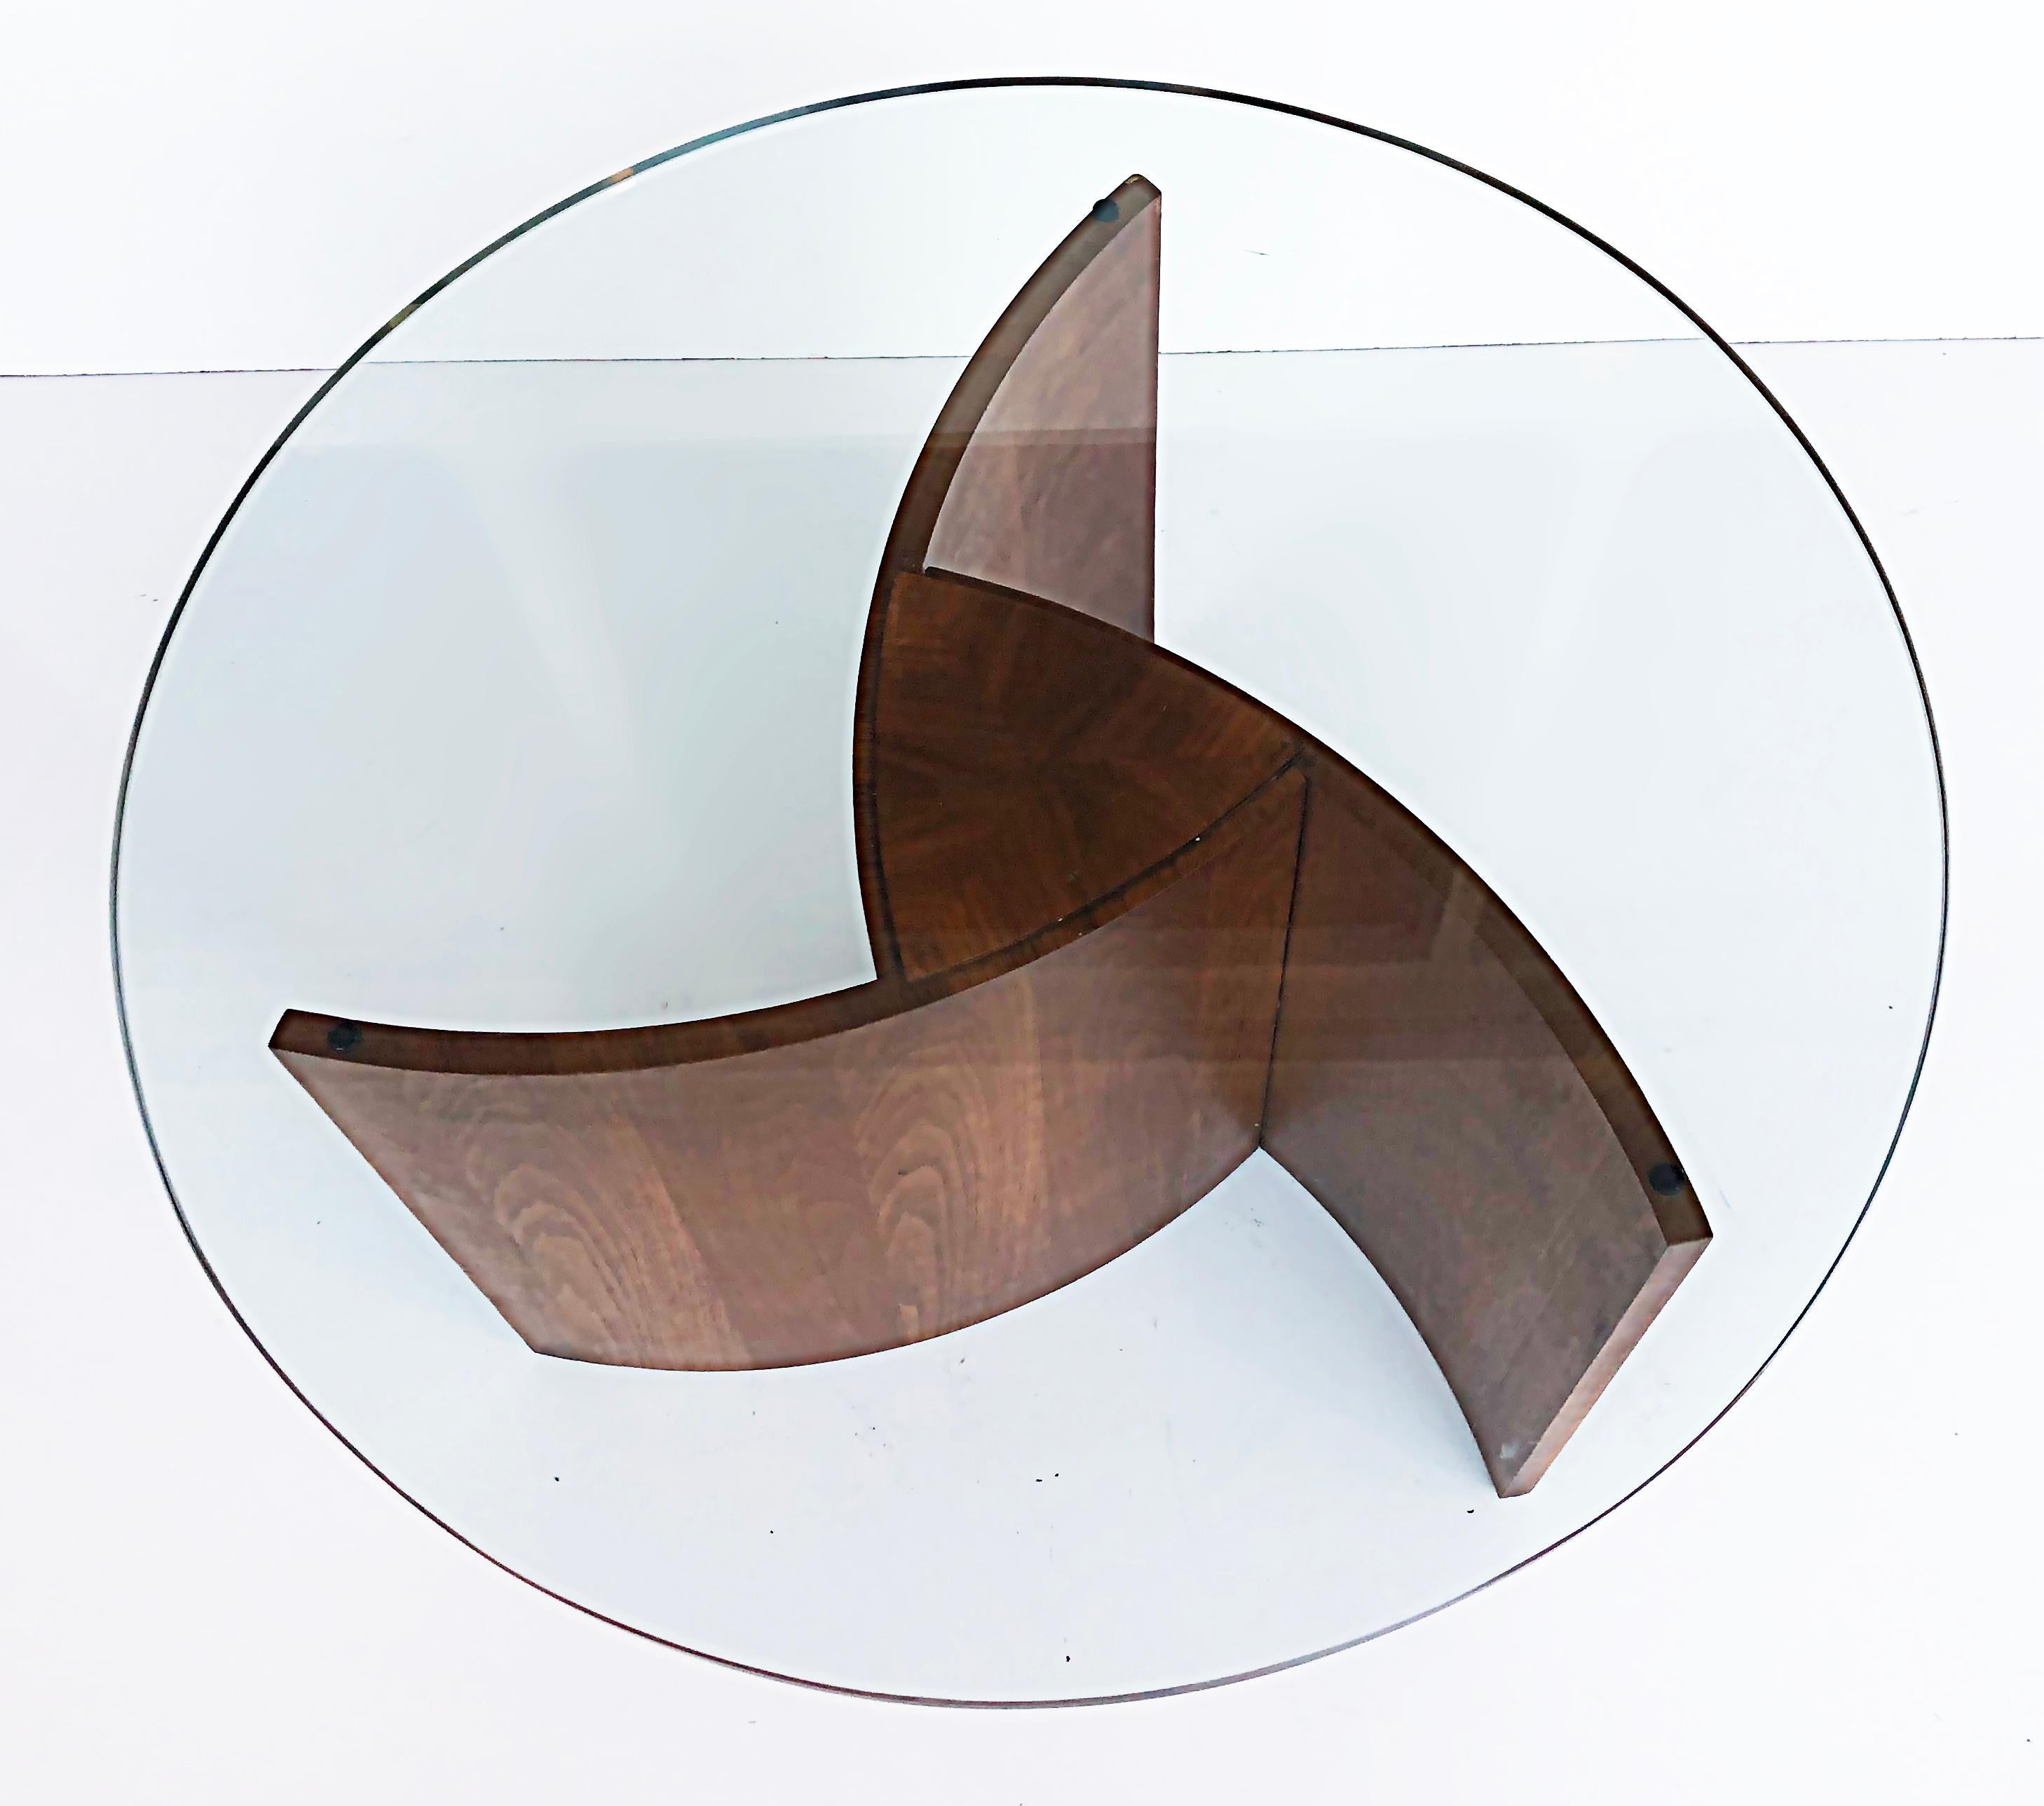 Vintage Vladimir Kagan Propellor form walnut coffee table with glass top, 1960s 

Offered for sale is a rare circa 1965 Vladimir Kagan (1927-2016) coffee table in walnut that has three curved fins that swirl as a propellor would. The table is